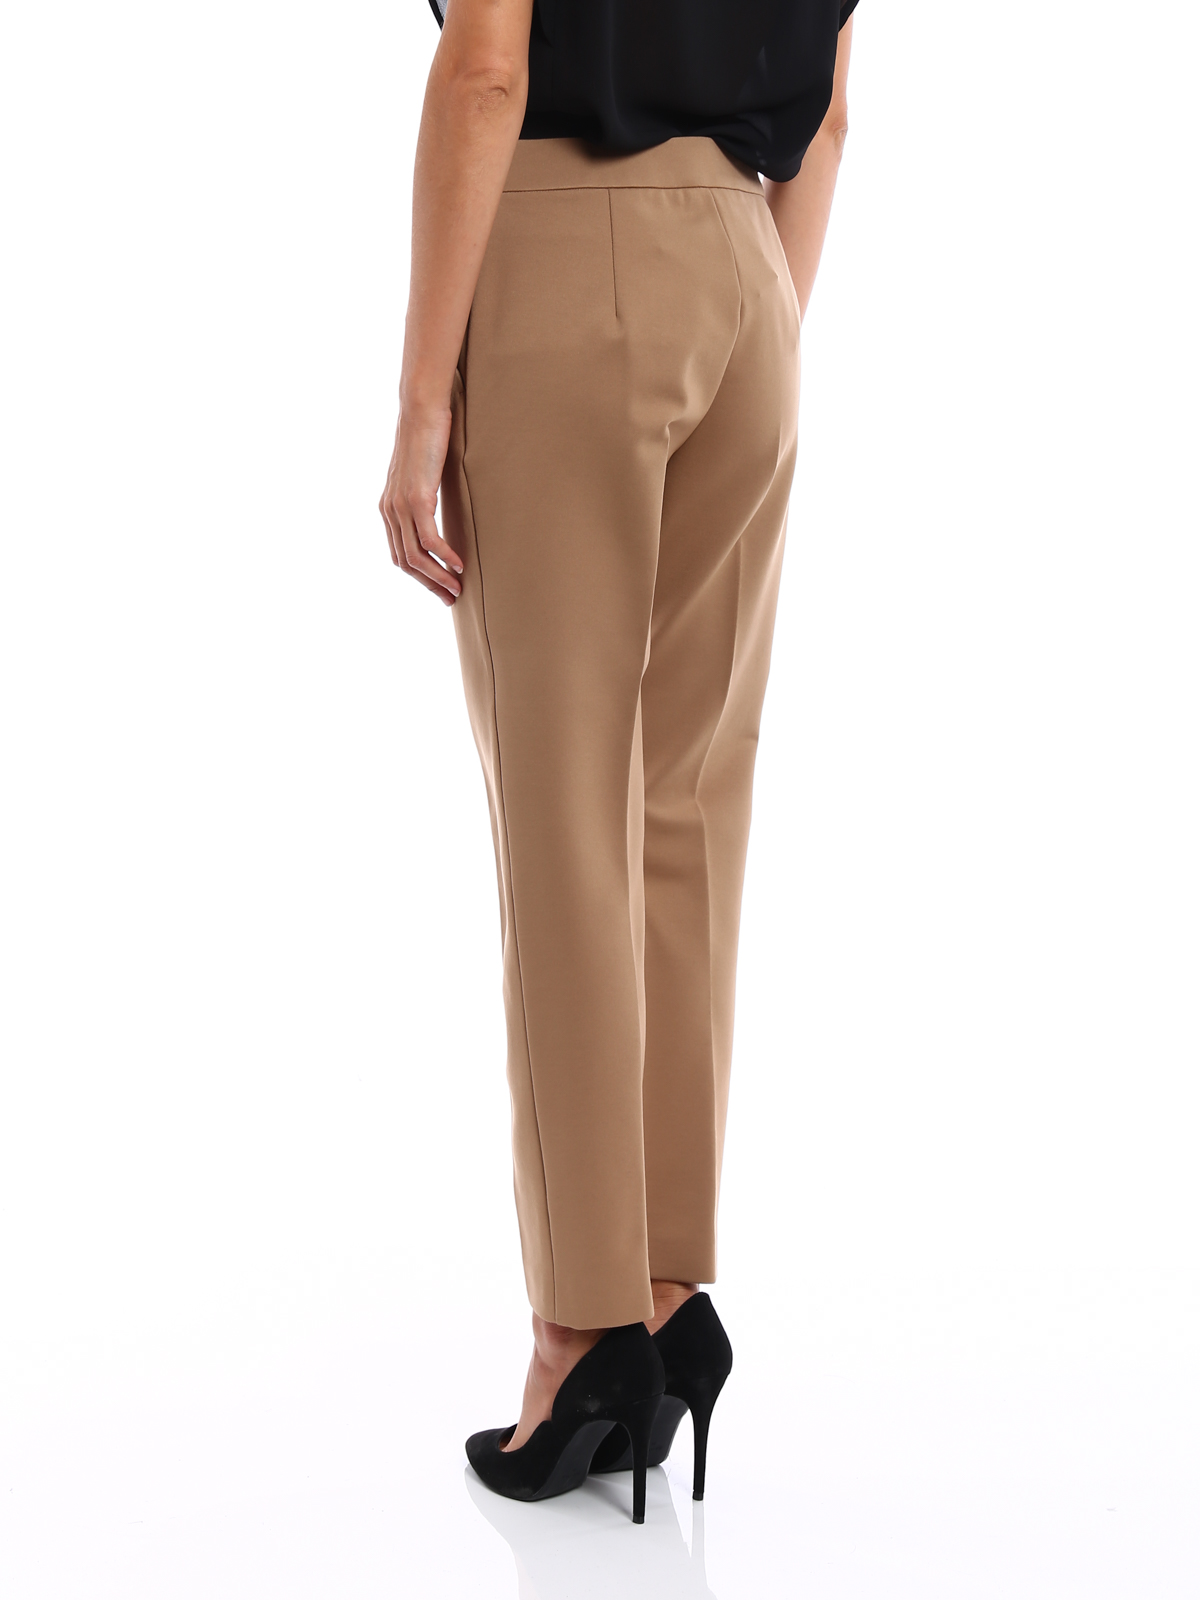 Shop Claudia Tapered Leg Pant in Black | Max Women's Fashion NZ